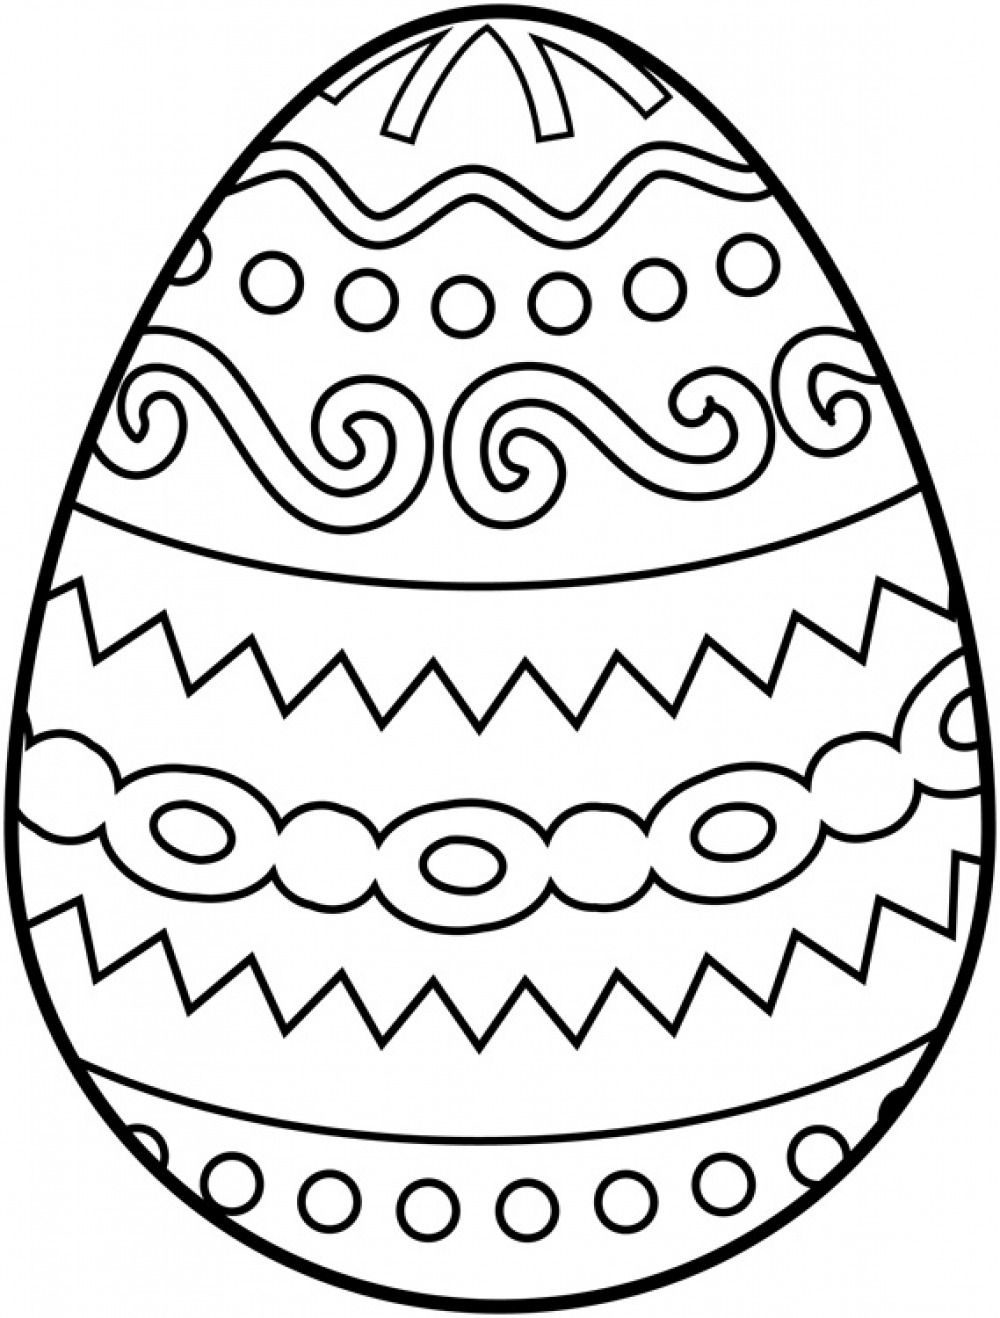 Unusual Easter Egg Printable Coloring Pages 6 For | Art Club 17-18 - Free Printable Easter Basket Coloring Pages